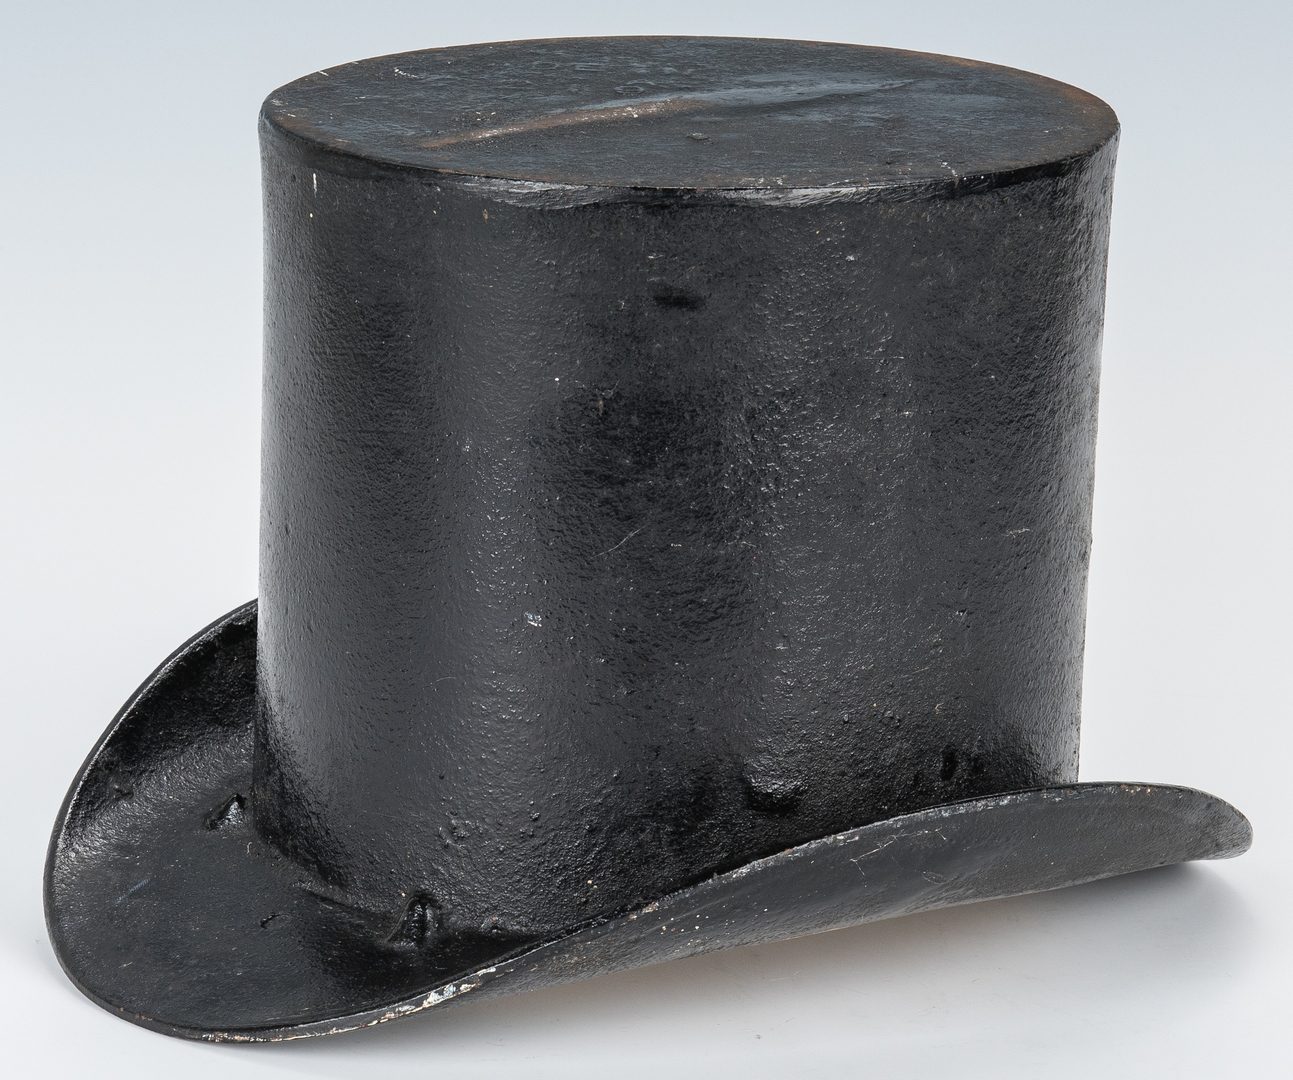 Lot 108: Cast Iron Top Hat Spittoon or Planter | Case Auctions